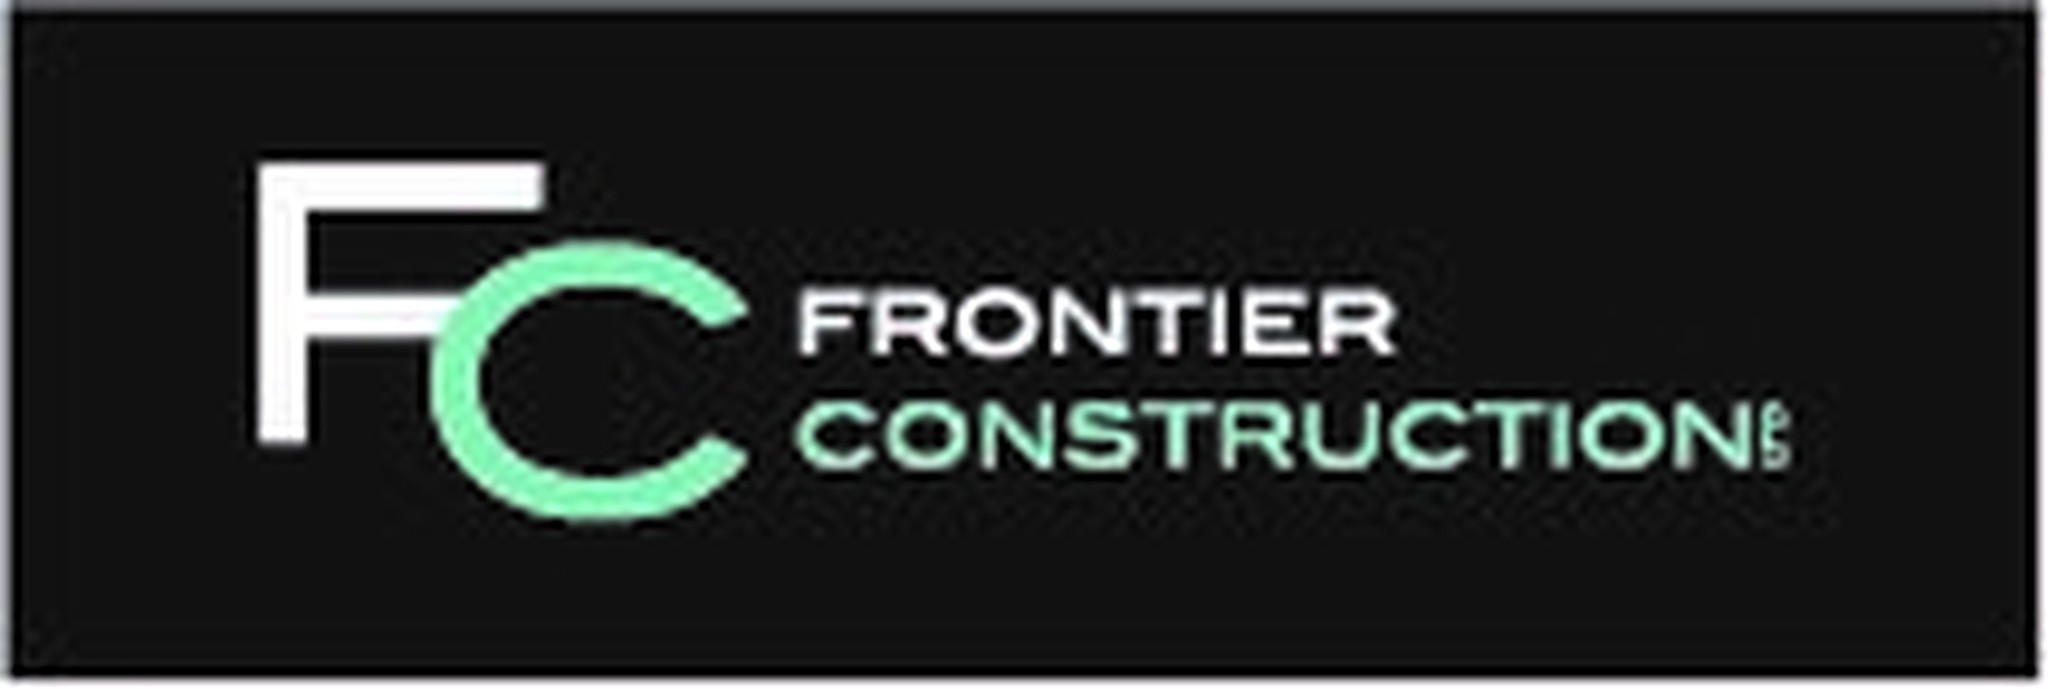 Frontier Construction Limited logo